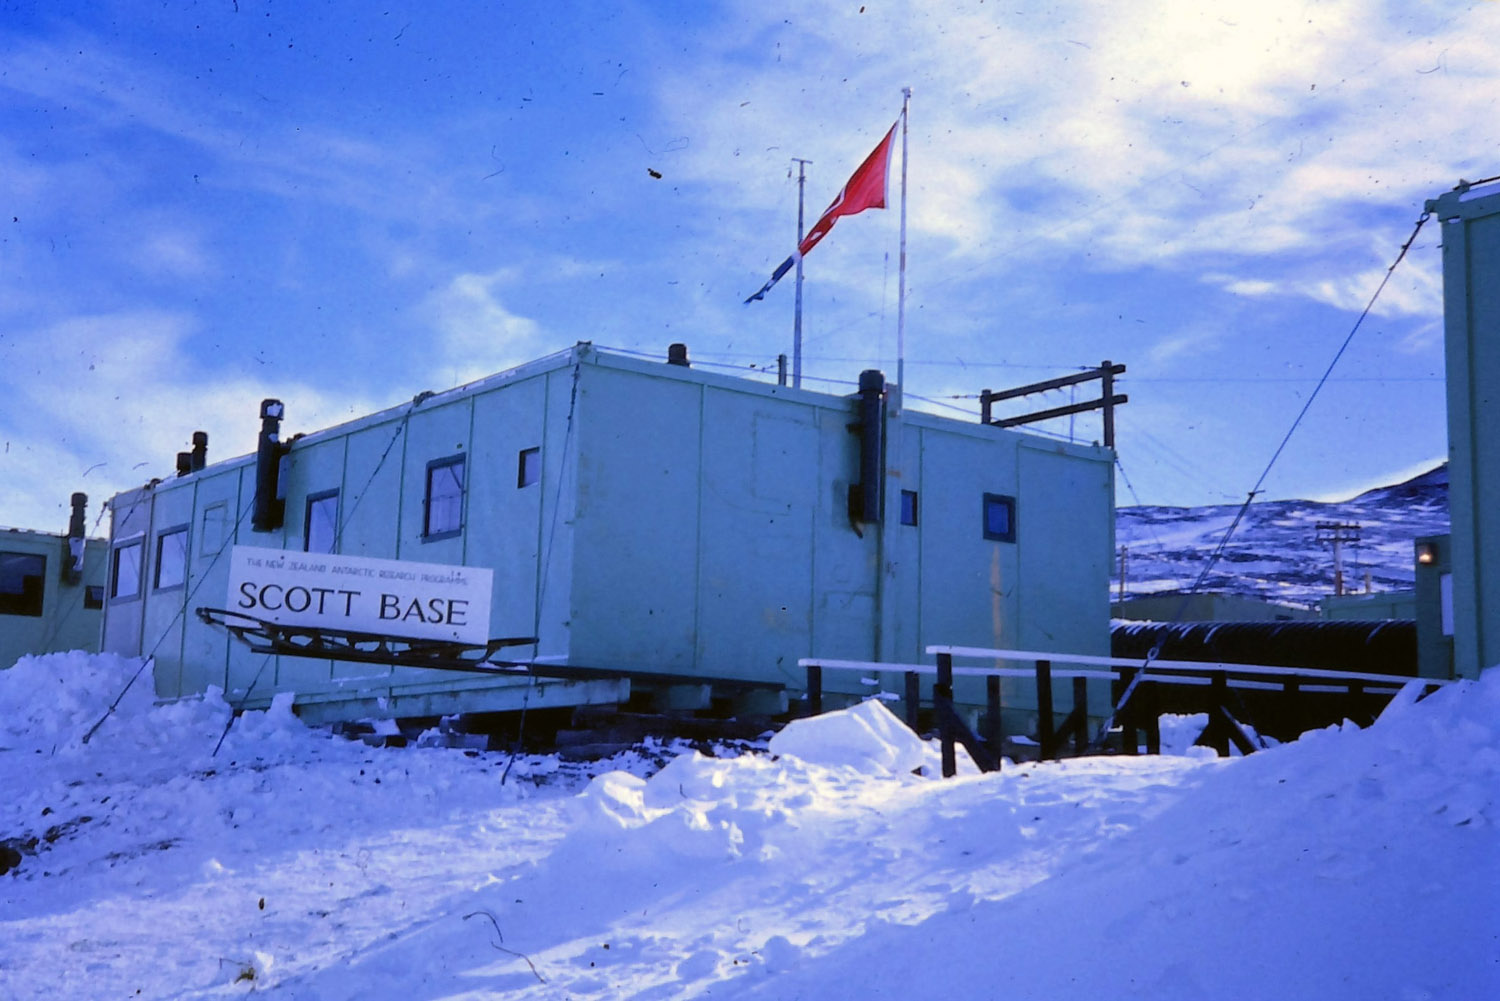 Main entry and post office at Scott Base - flying the flag of New Zealand Post